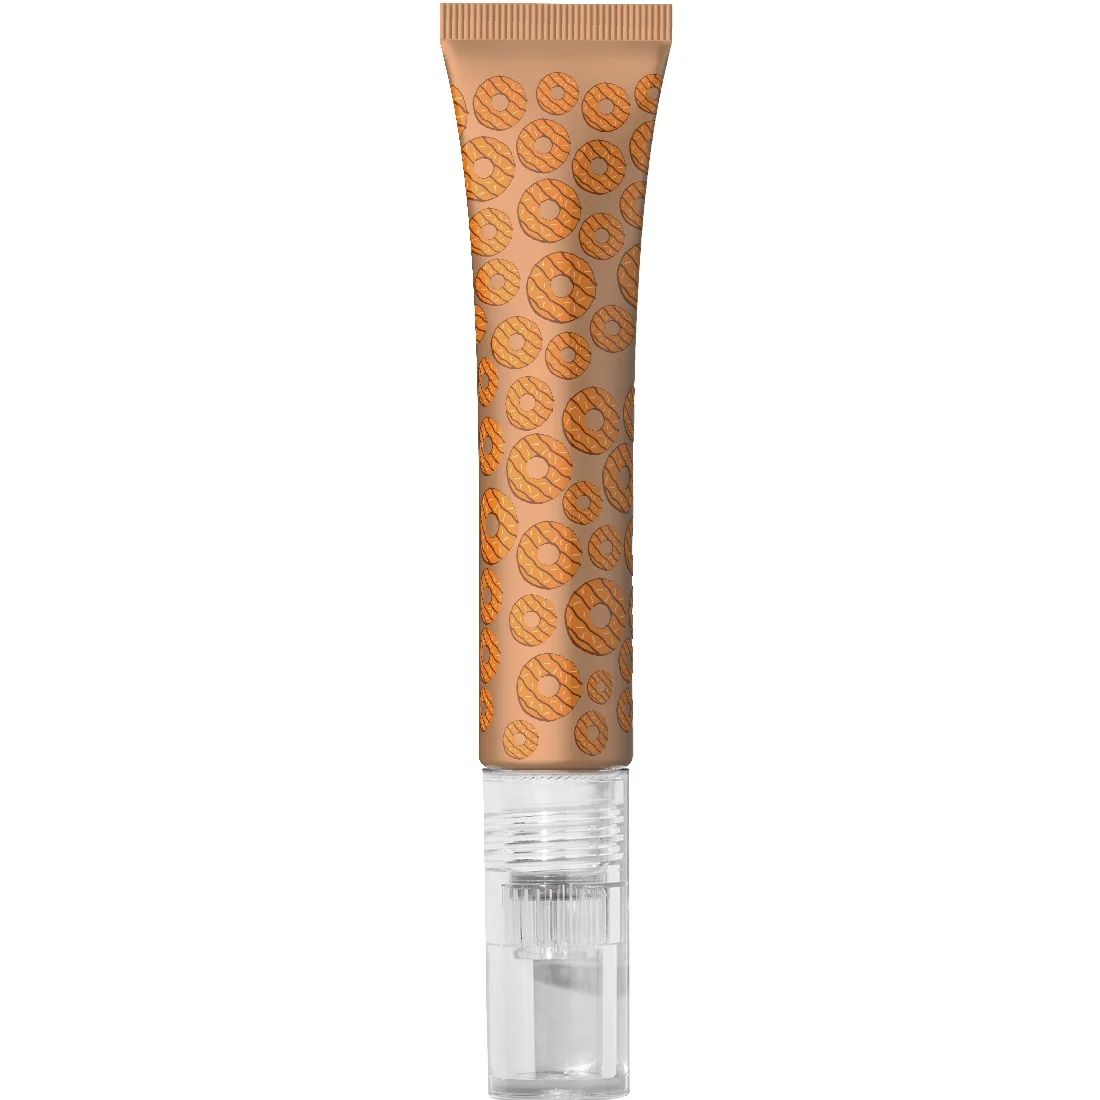 Hard Candy x Girl Scout Cookie Icing Face Highlighter, Coconut Caramel, Coconut Caramel-Scented | Walmart (US)